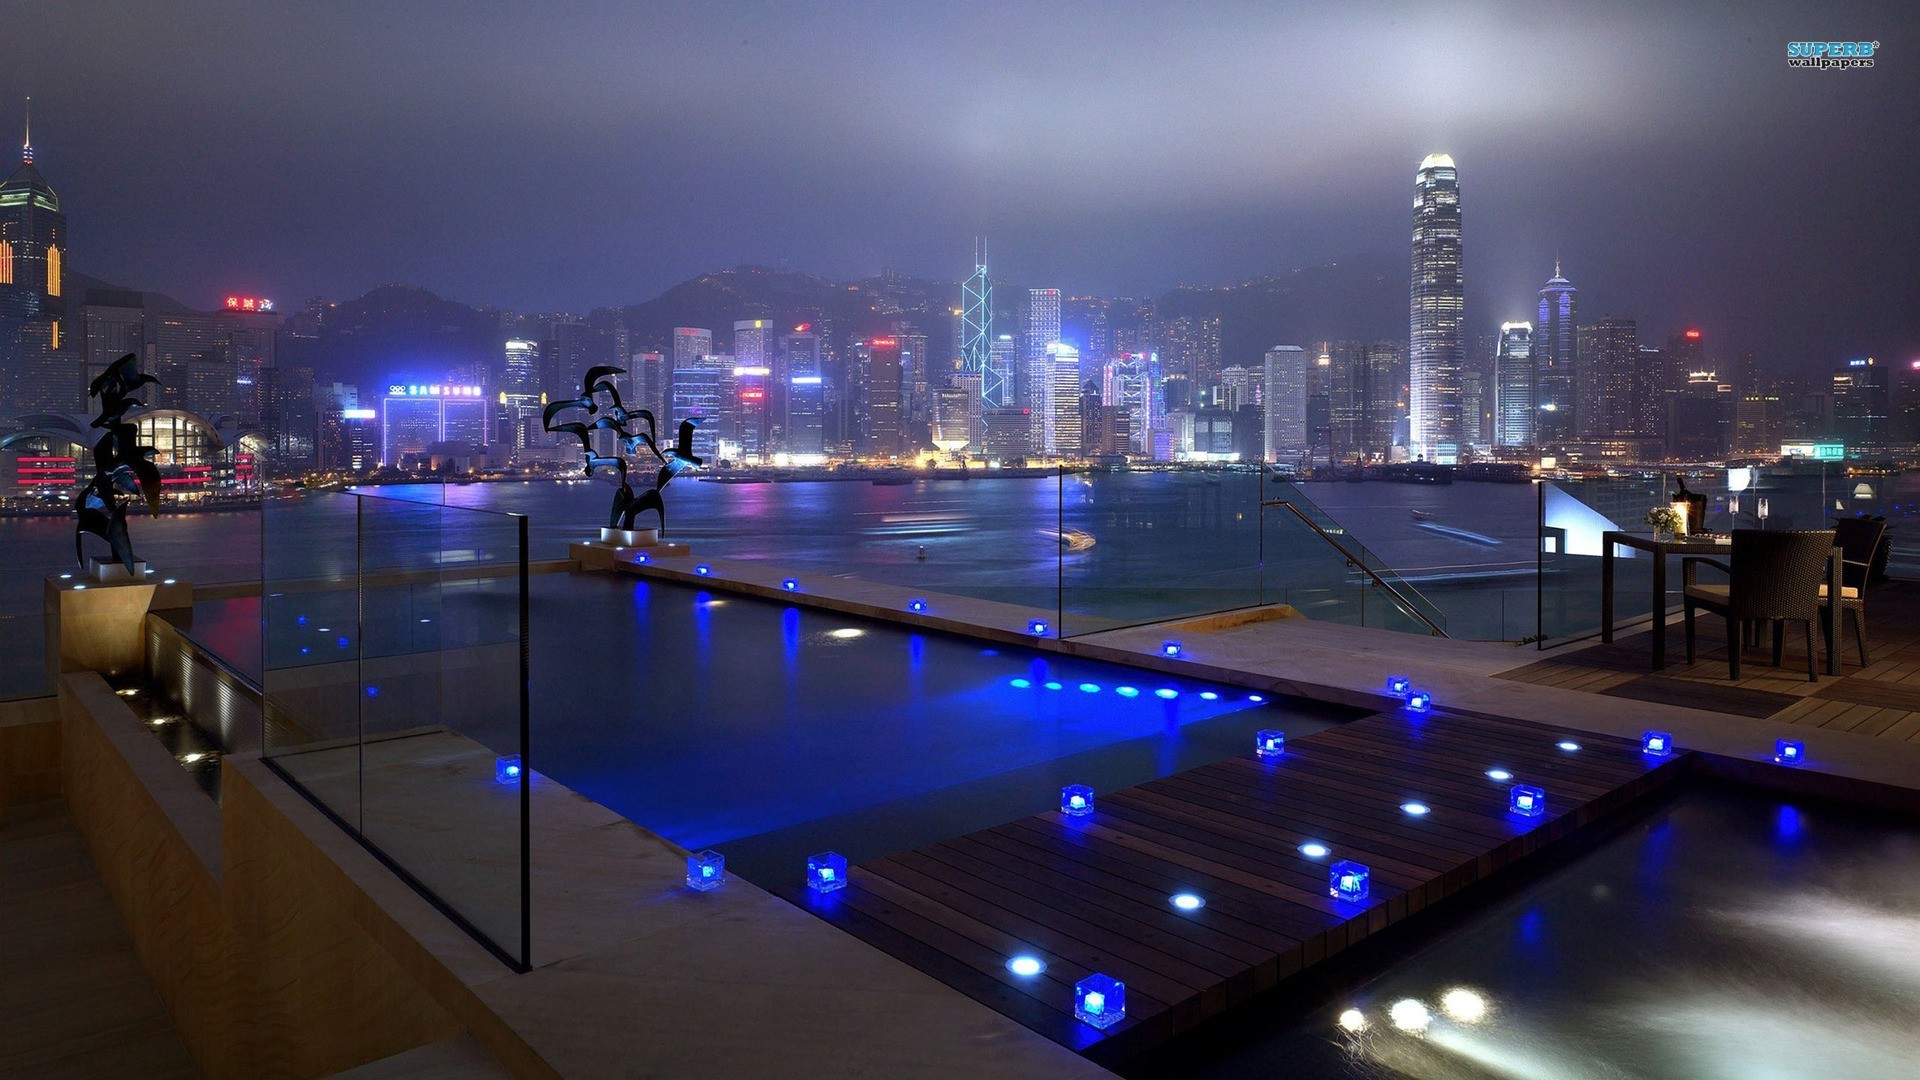 General 1920x1080 city night lights architecture Hong Kong cityscape long exposure swimming pool skyscraper building hills water Asia China city lights